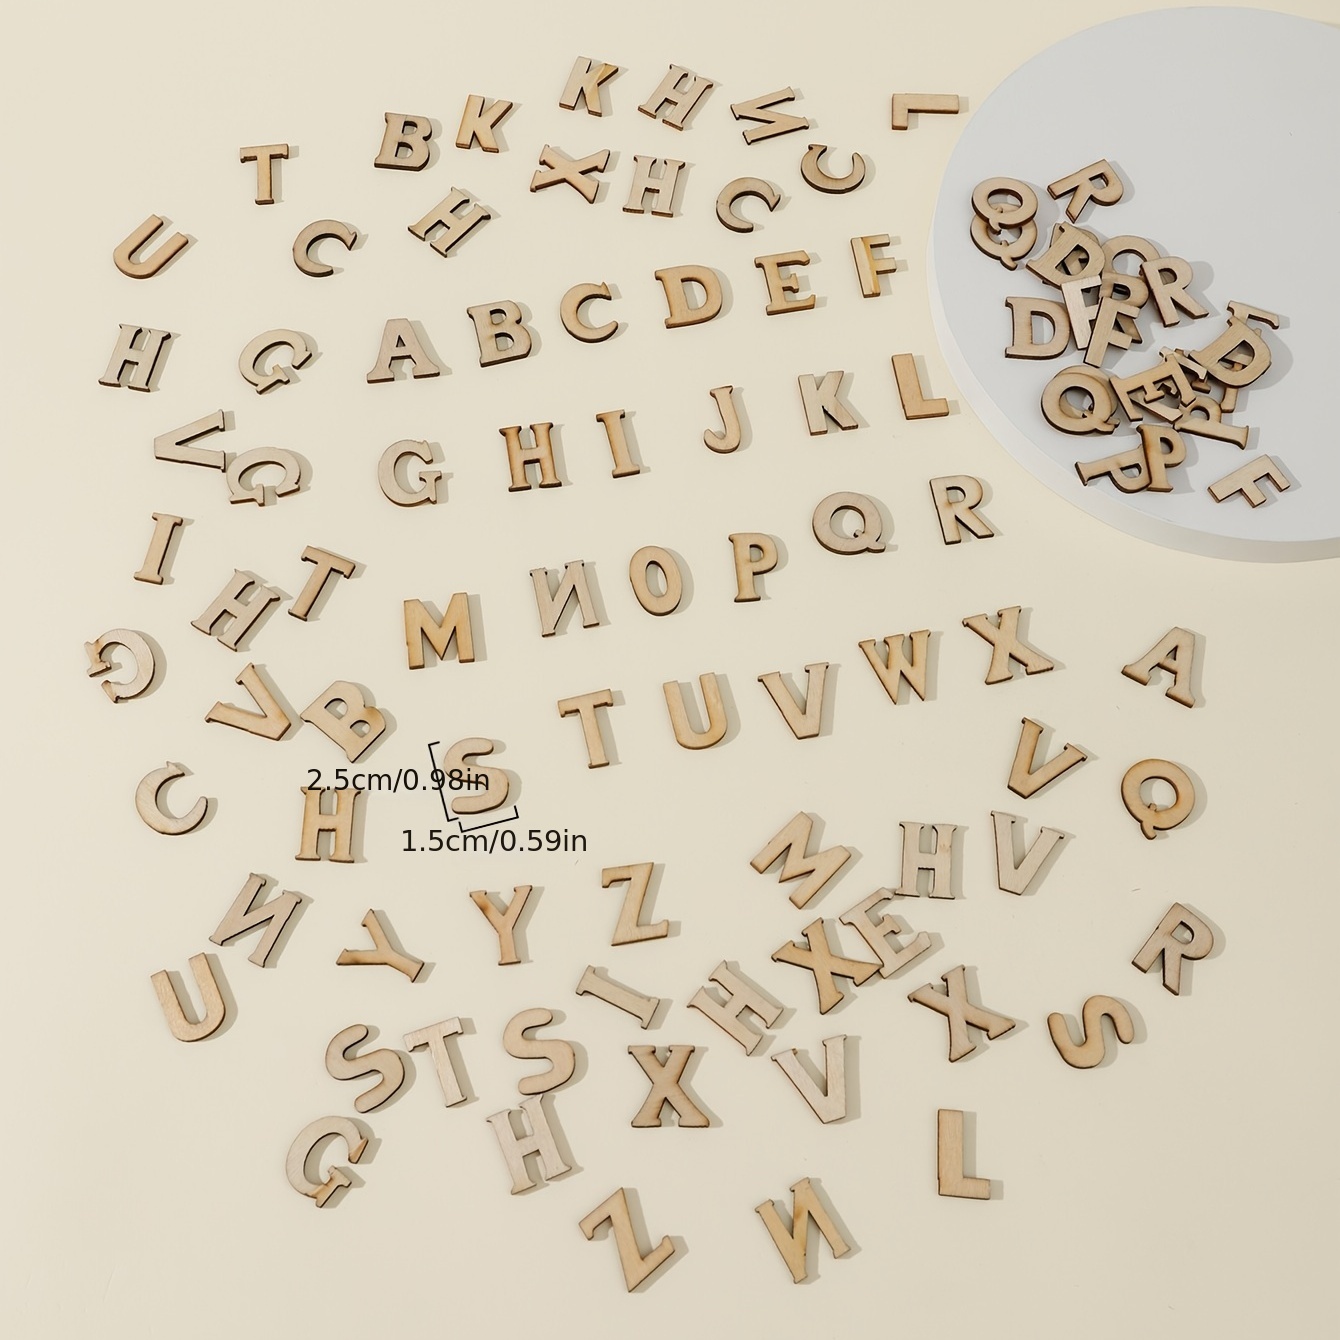 Wooden Letters & Numbers in Wood Crafting